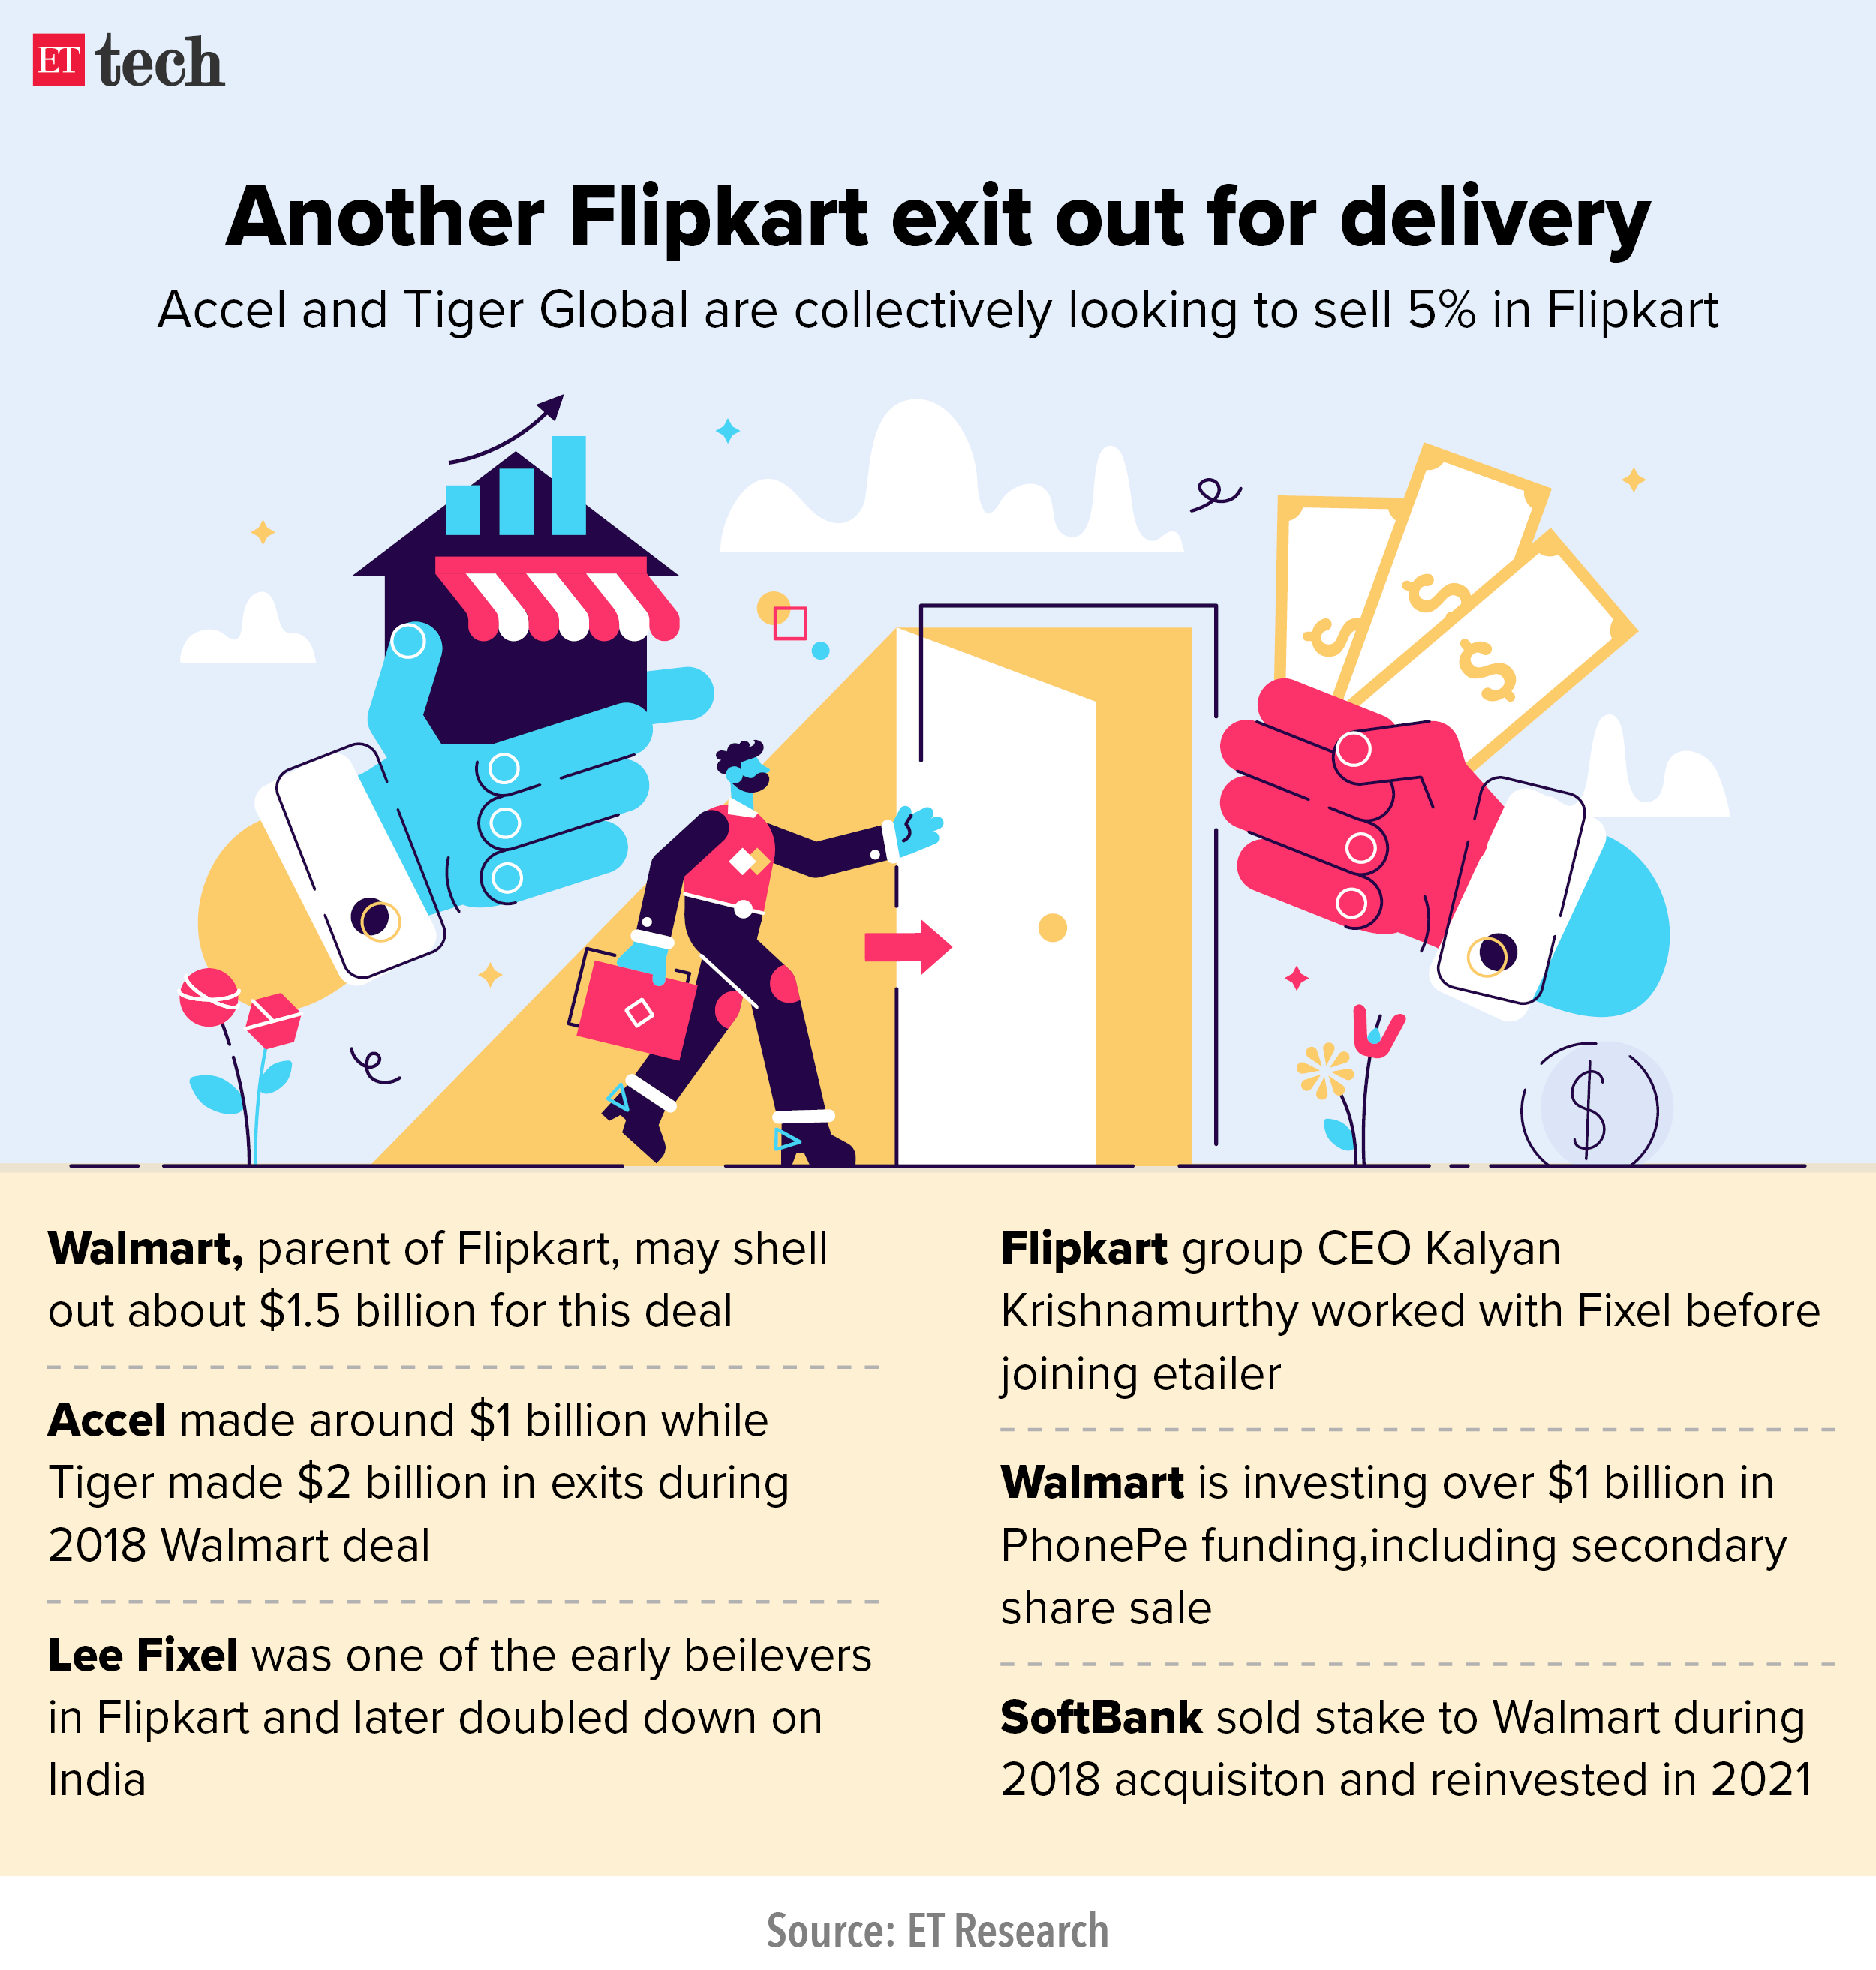 Another Flipkart outlet for shipping